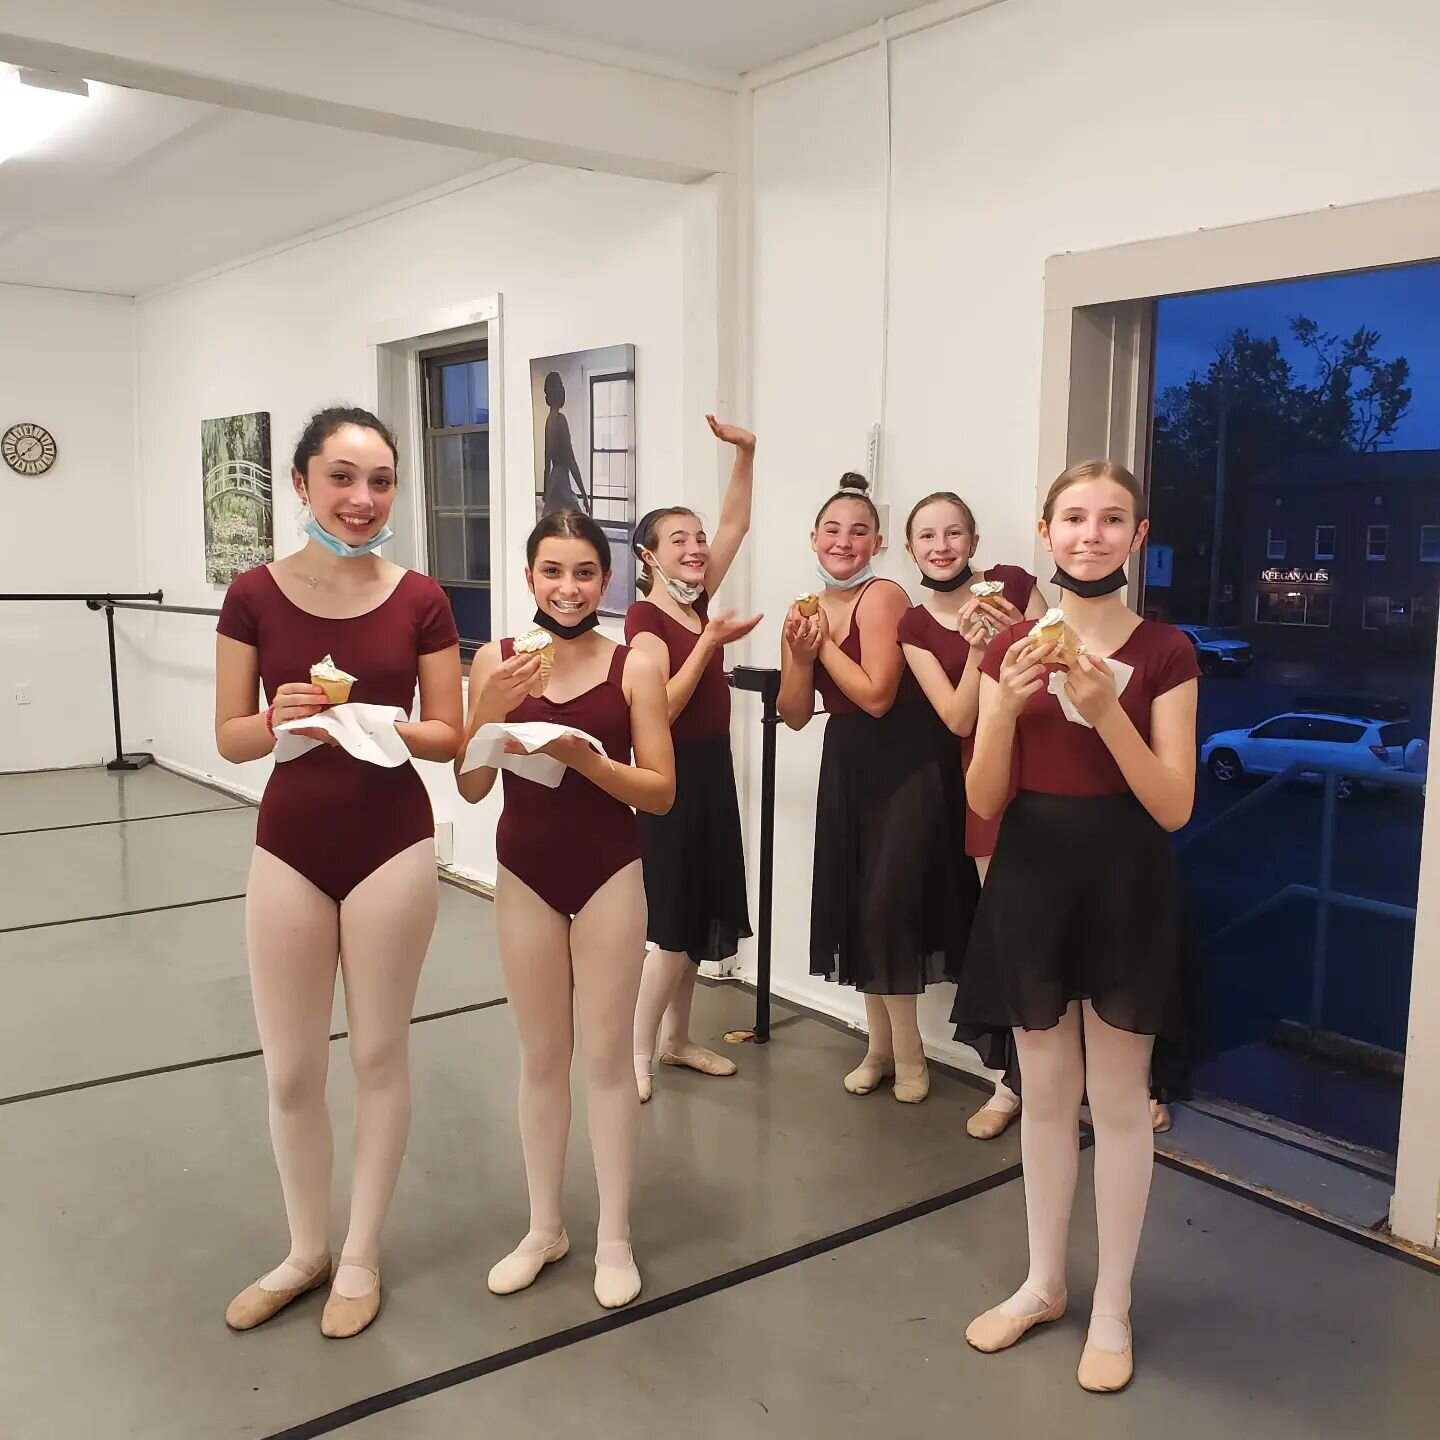 Something to celebrate!  Registration for Fall 2022 is now open to returning students! Email us at balletschoolofkingston@gmail.com if you did not receive your  registration forms.
Registration for new families begins Aug. 21st!